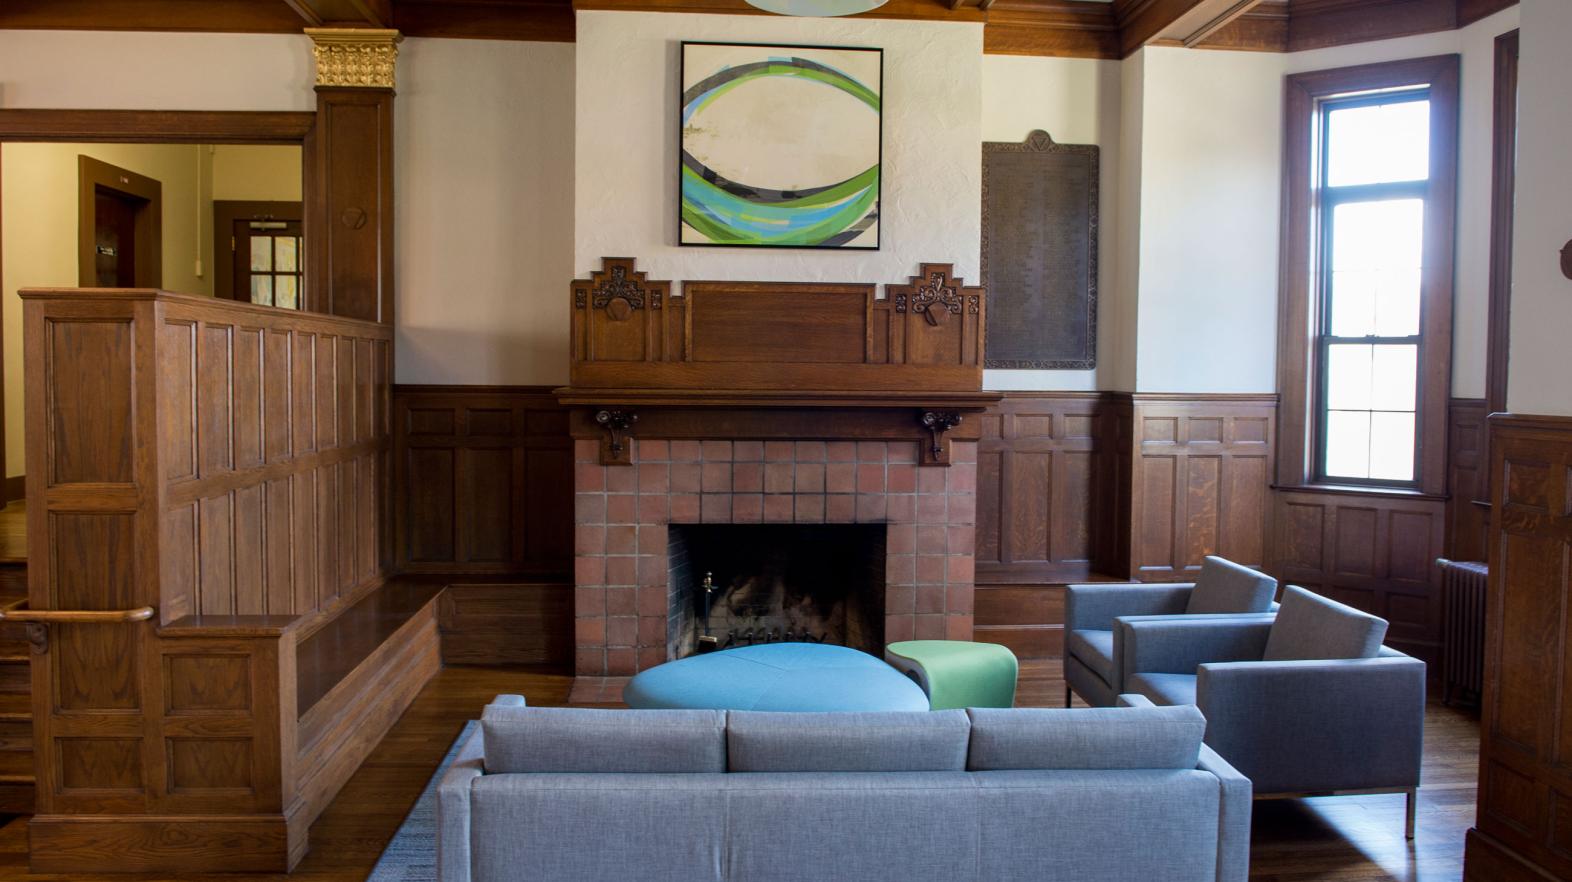 Carlisle Foyer, located in Alumni Hall, features a fireplace and lounge area for students.